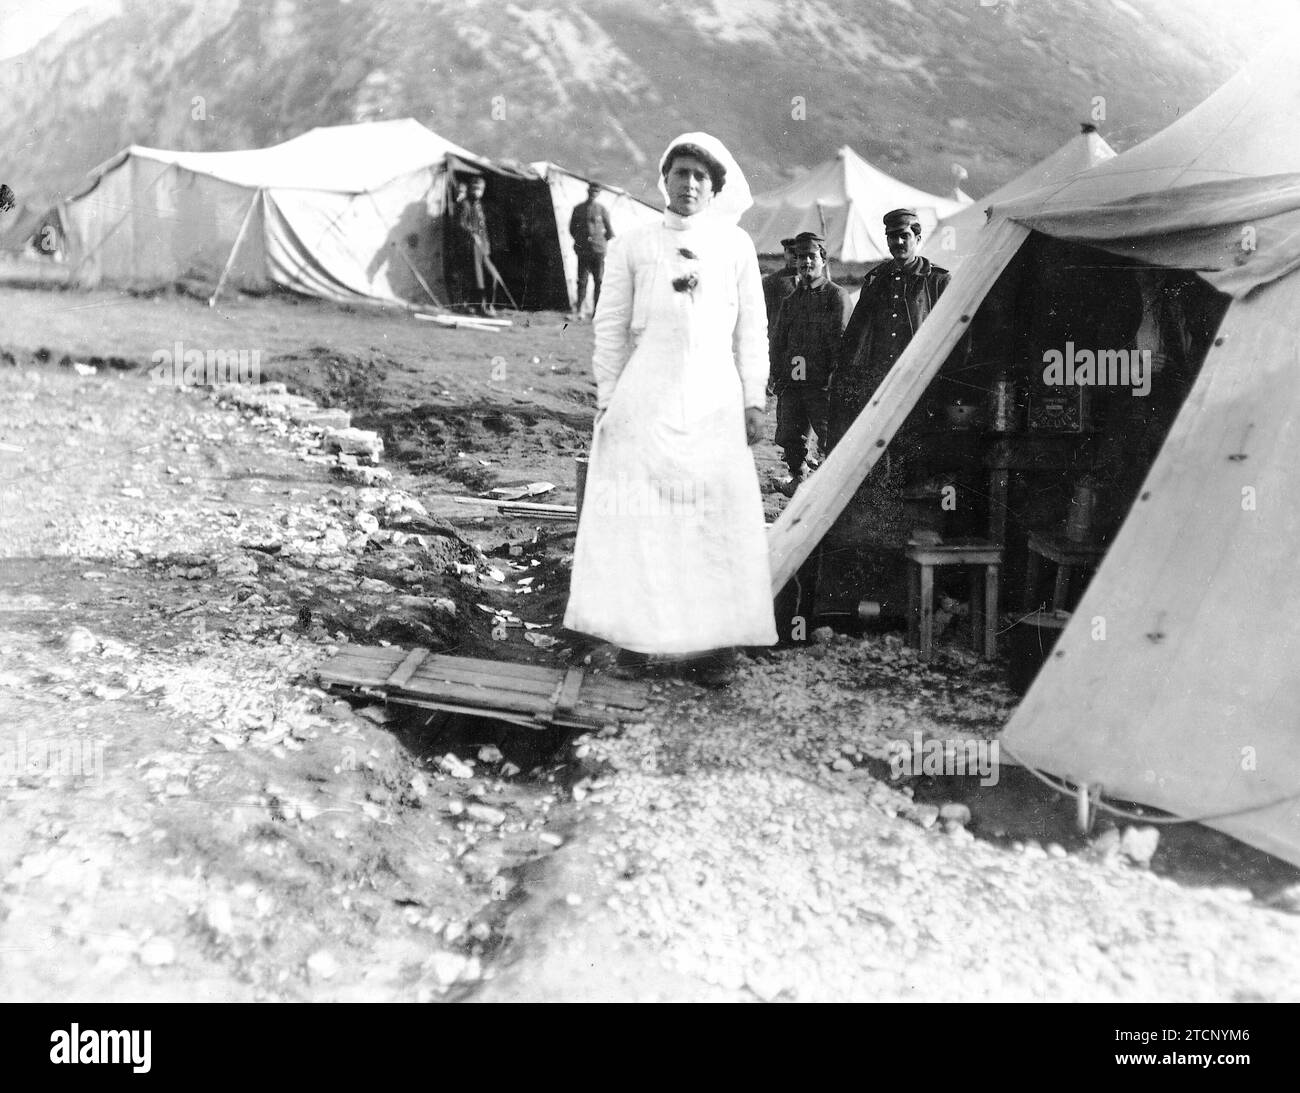 01/01/1913. The Greek royal family and the Eastern War. Princess Alice in Janina's camp, in front of the tent from which she Directs the Ambulances. Photo Illustrations Bureau. Credit: Album / Archivo ABC / Illustrations Bureau Stock Photo